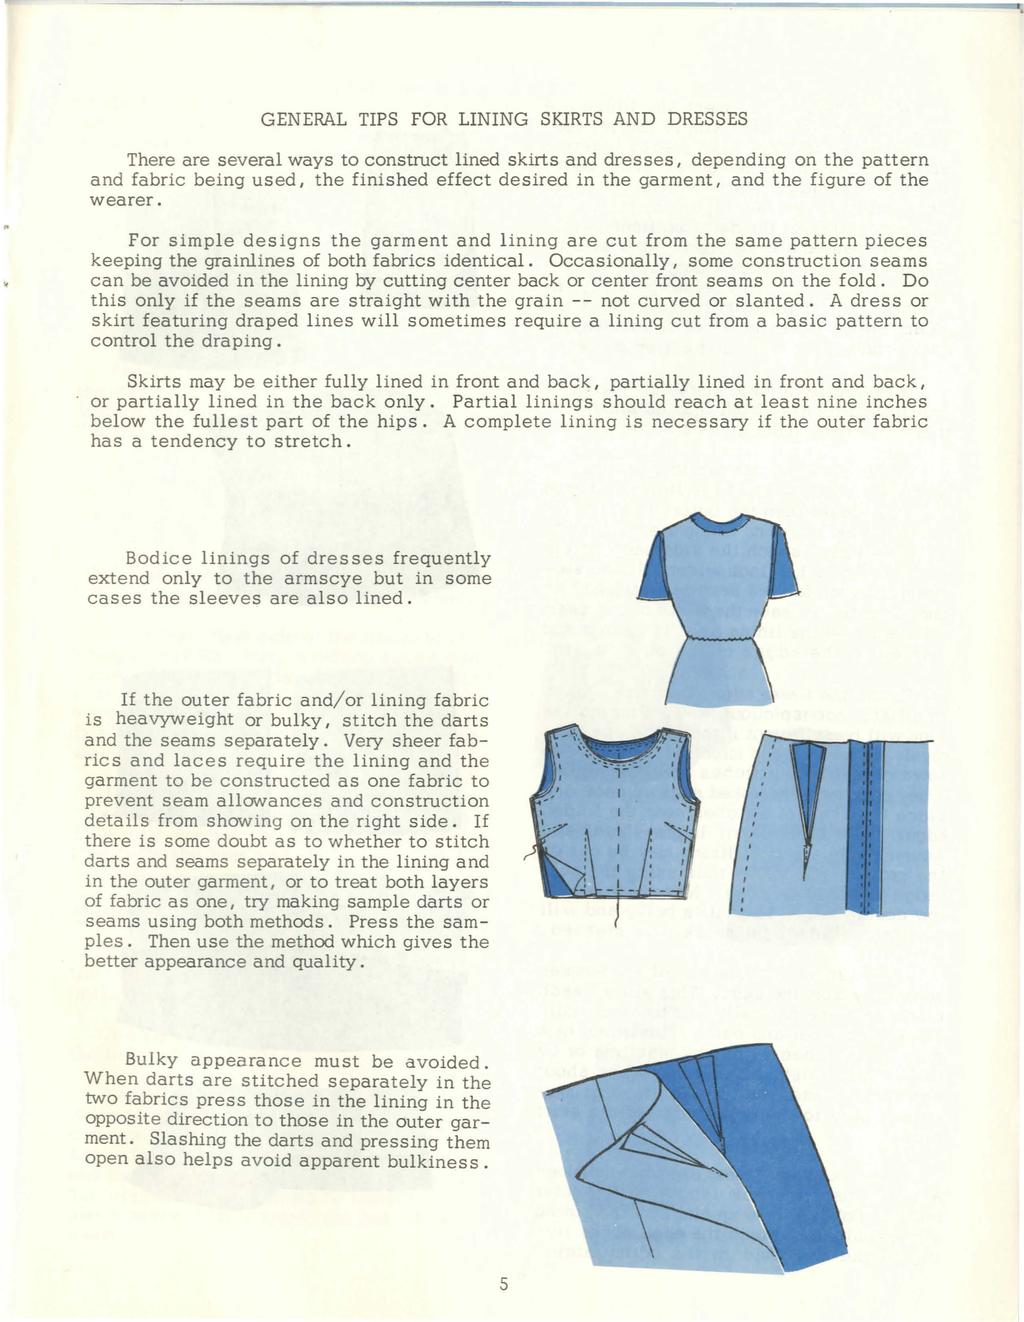 GENERAL TIPS FOR LINING SKIRTS AND DRESSES There are several ways to construct lined skirts and dresses I depending on the pattern and fabric being used I the finished effect desired in the garment I